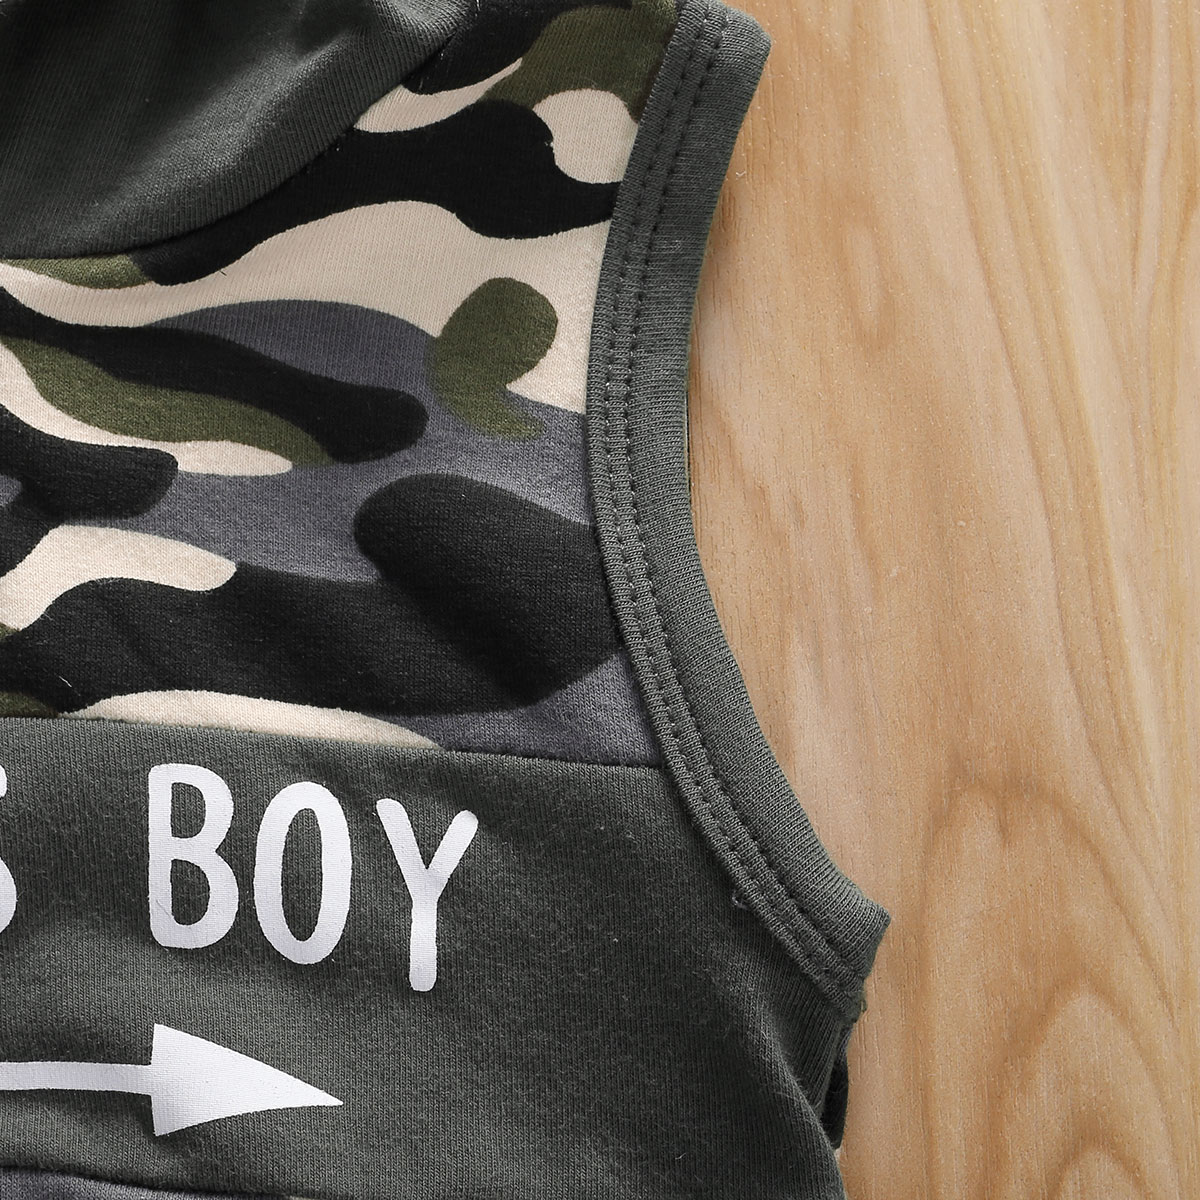 2020 Baby Summer Clothing Toddler Baby Boys Clothes Infant Letter Hoodie Sweatshirt+Camo Shorts Bottoms 2Pcs Spring Outfits Set